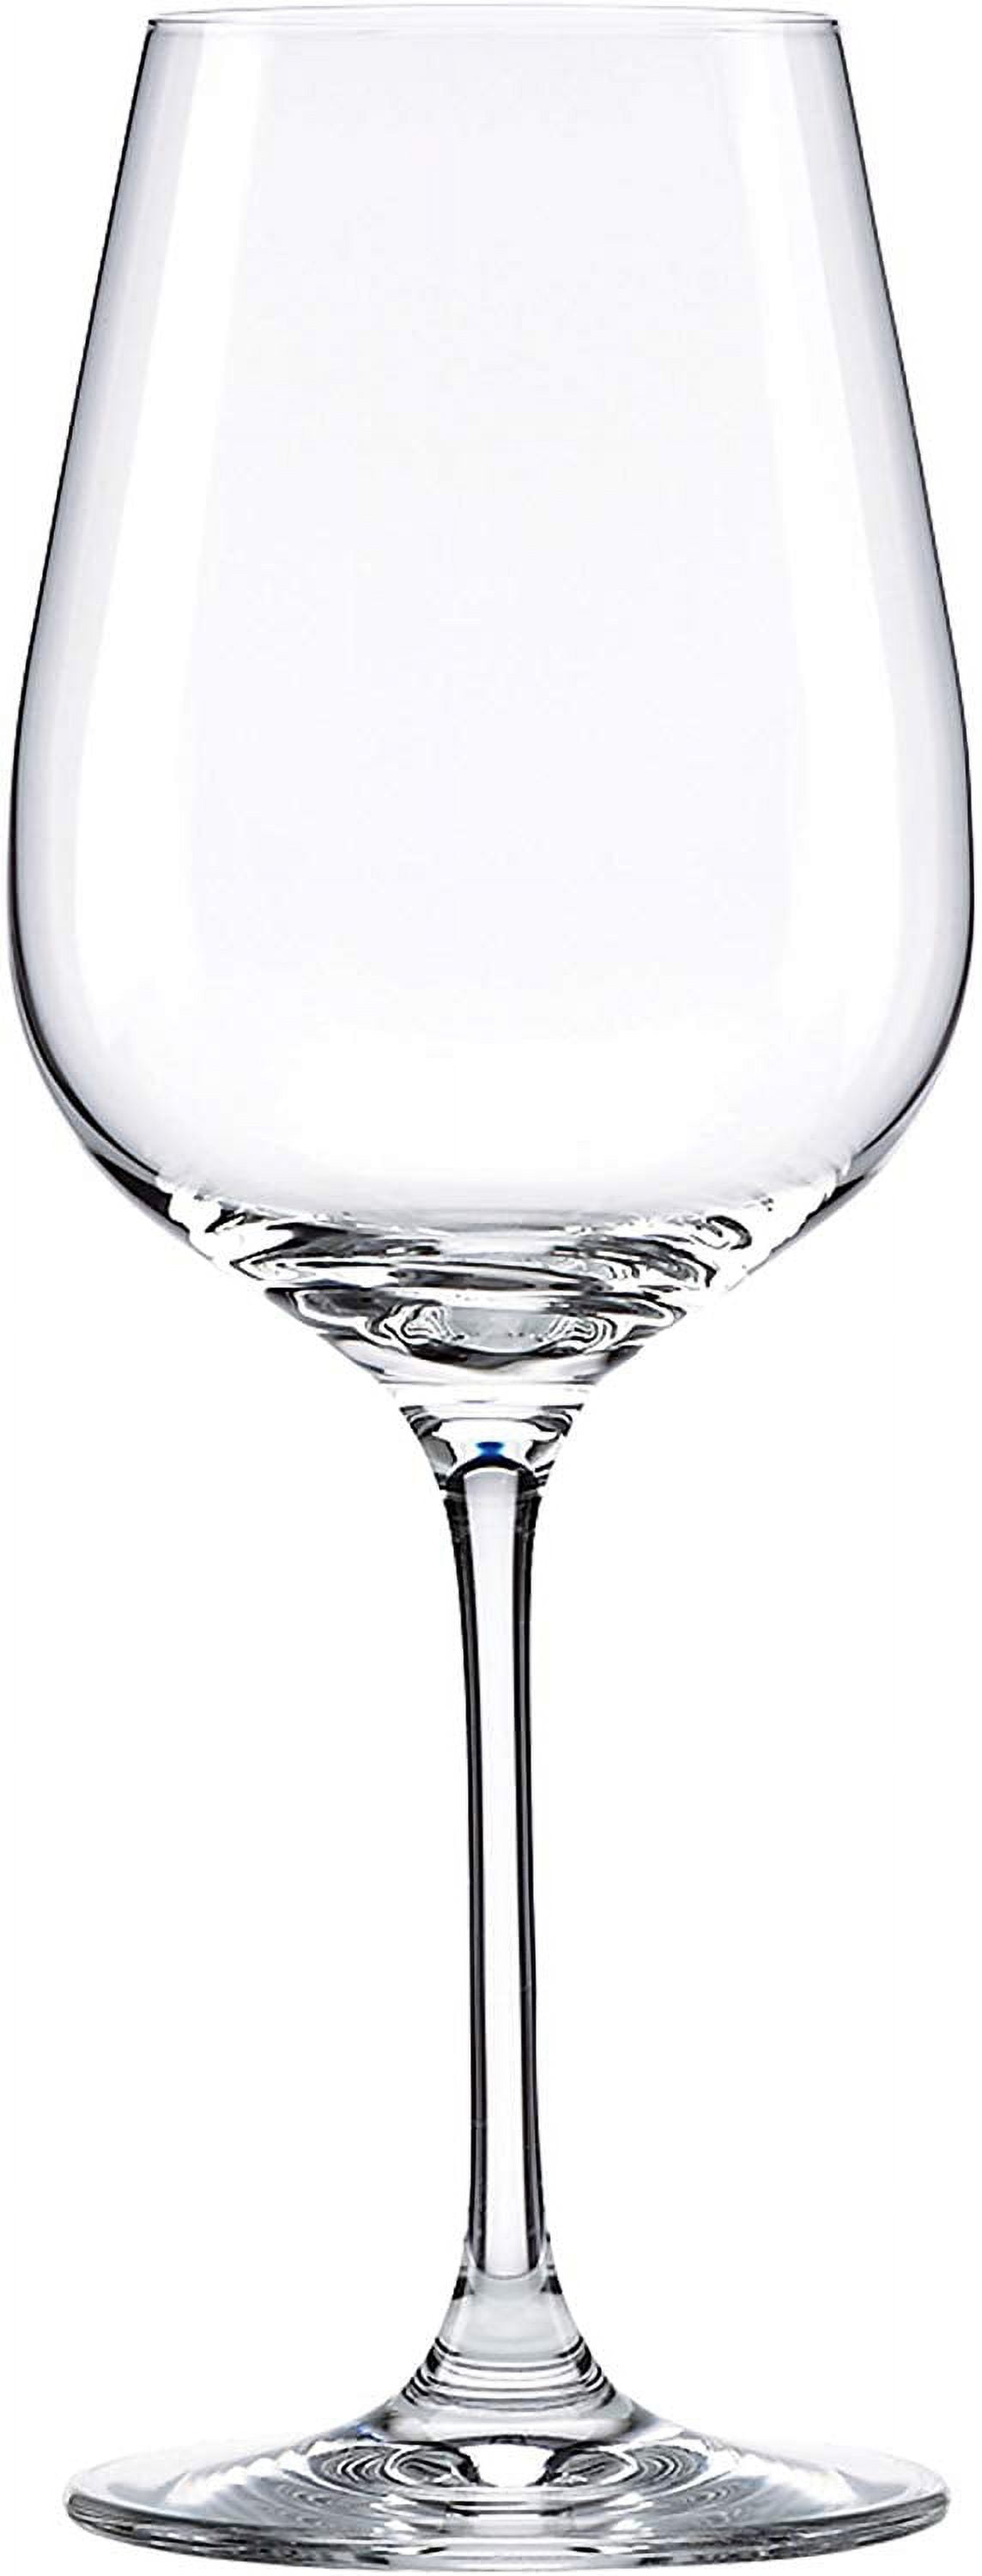 Lenox Tuscany Personalized Crystal White Wine Glass, Pair